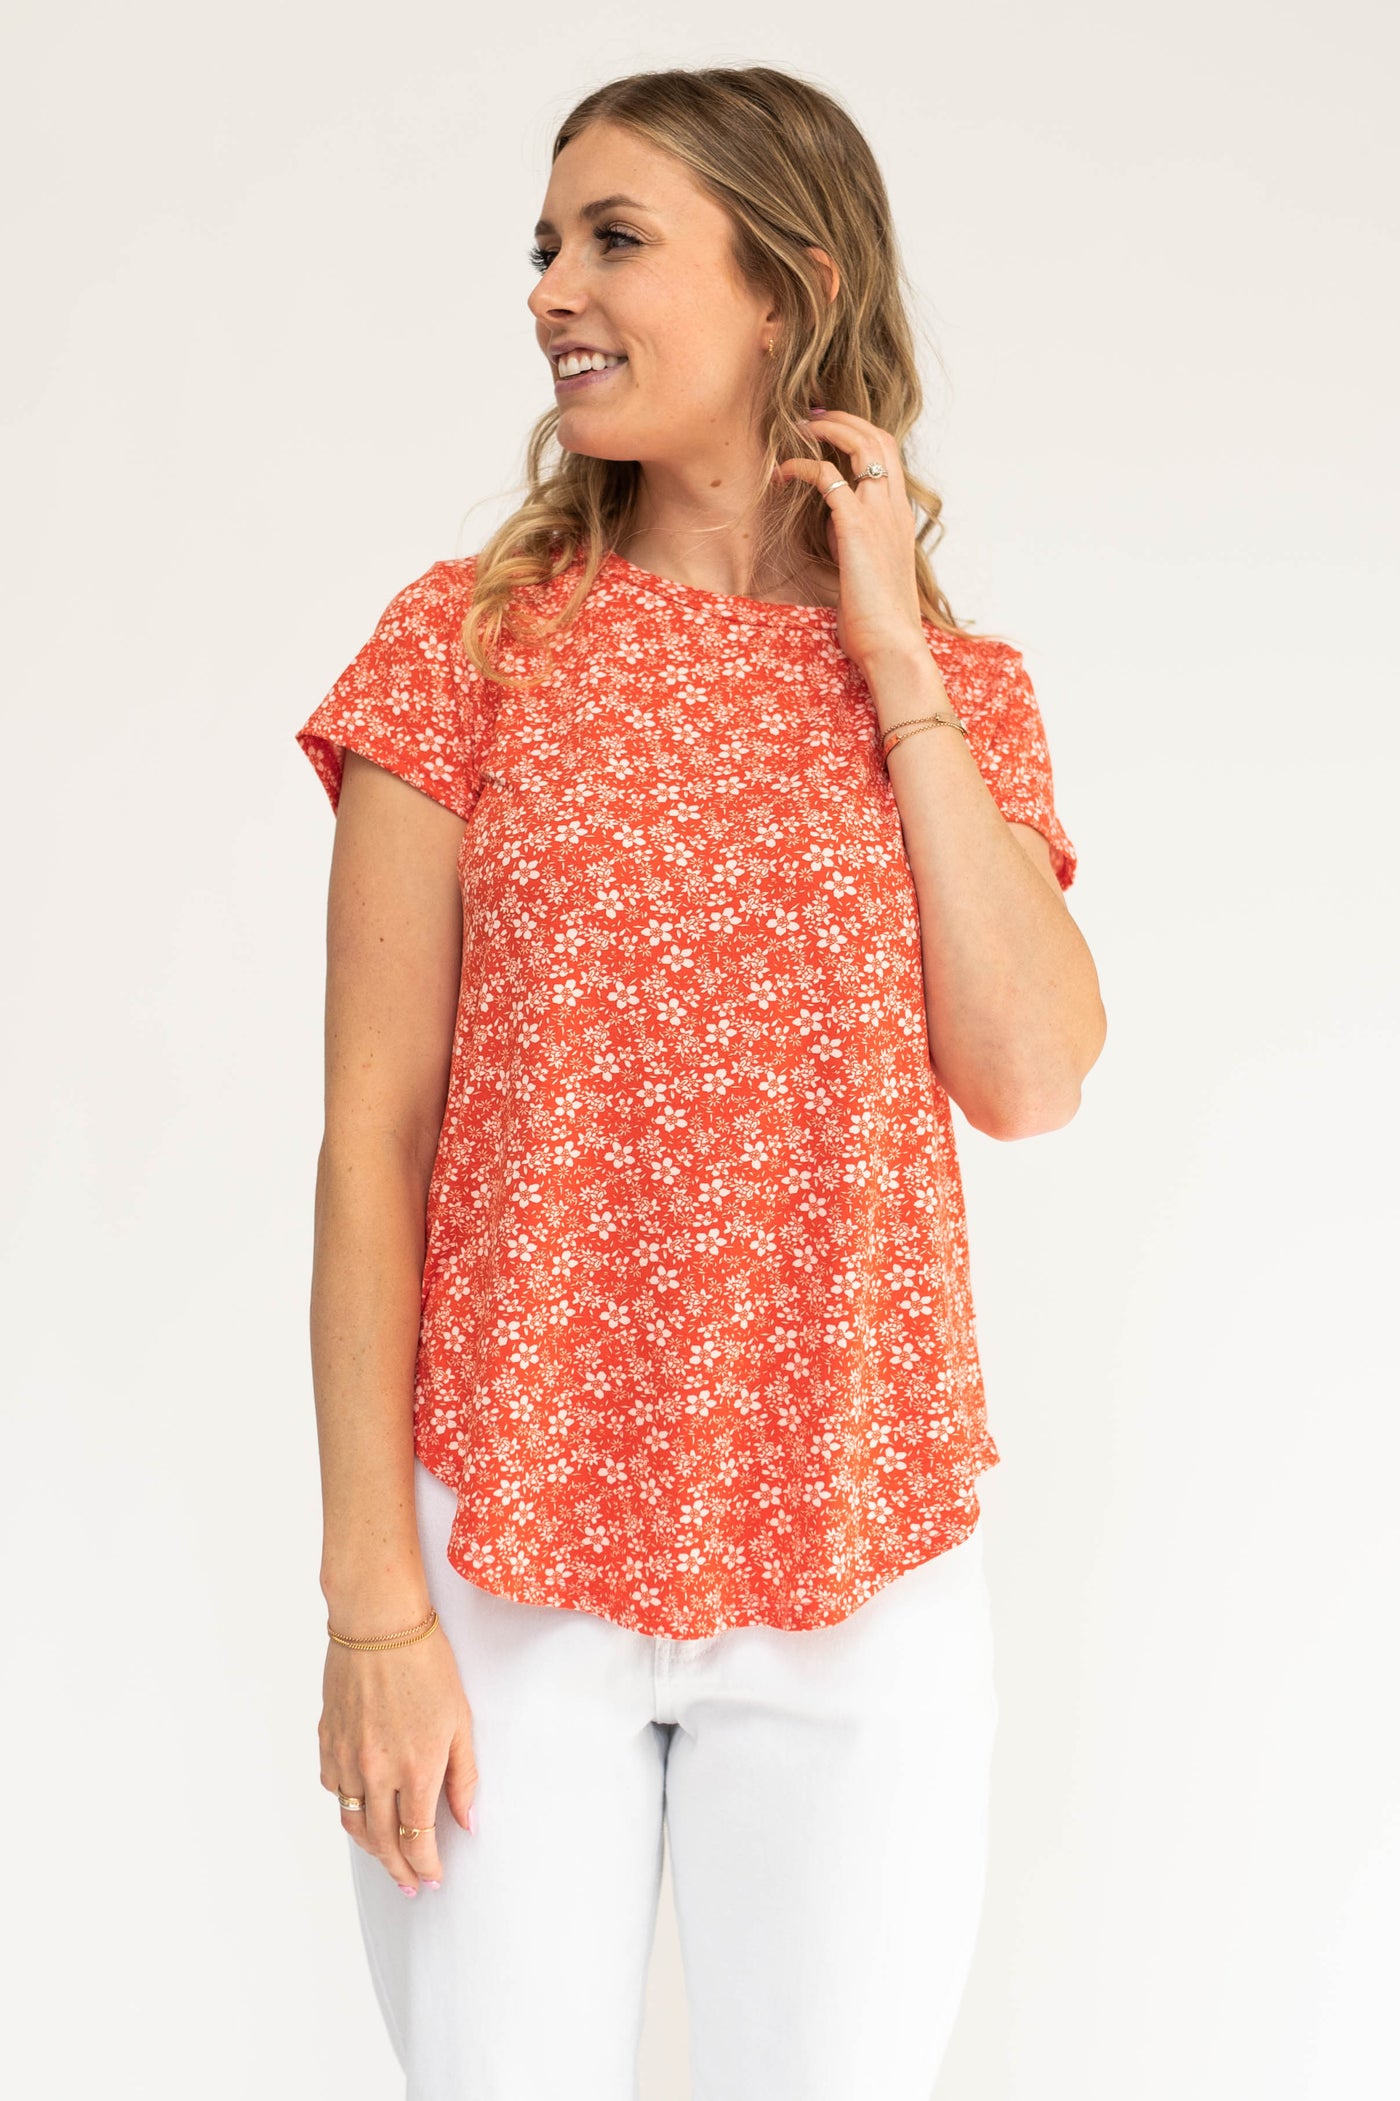 White floral print on a coral red top